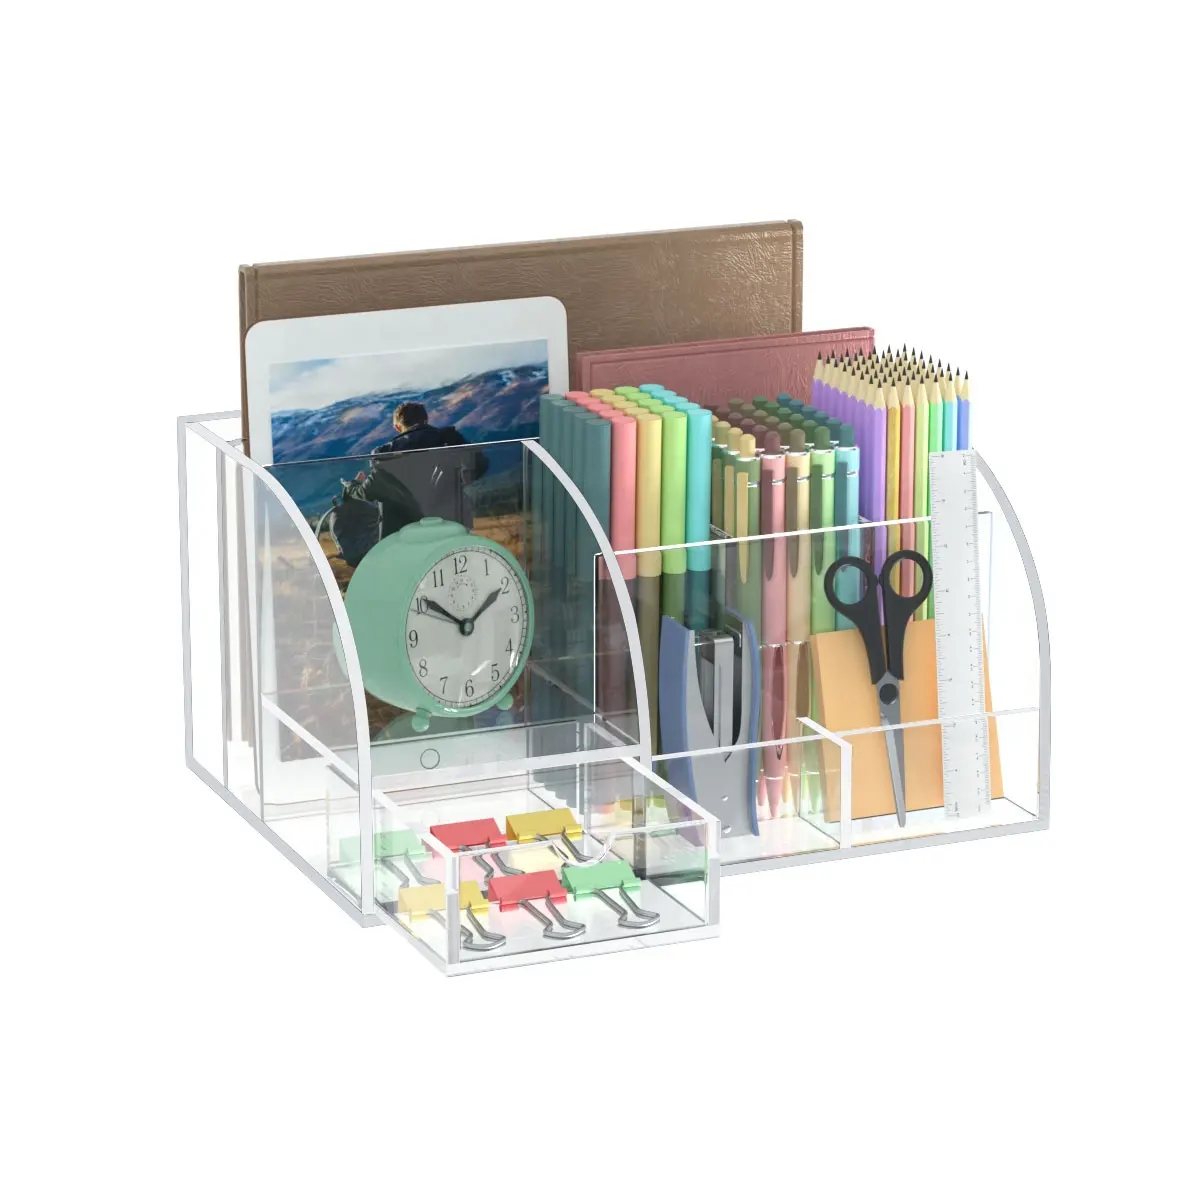 Acrylic Office Desk Organizers and Accessories, Desk Organizer with Pen Holder, Remote Control  Organizer with Drawer